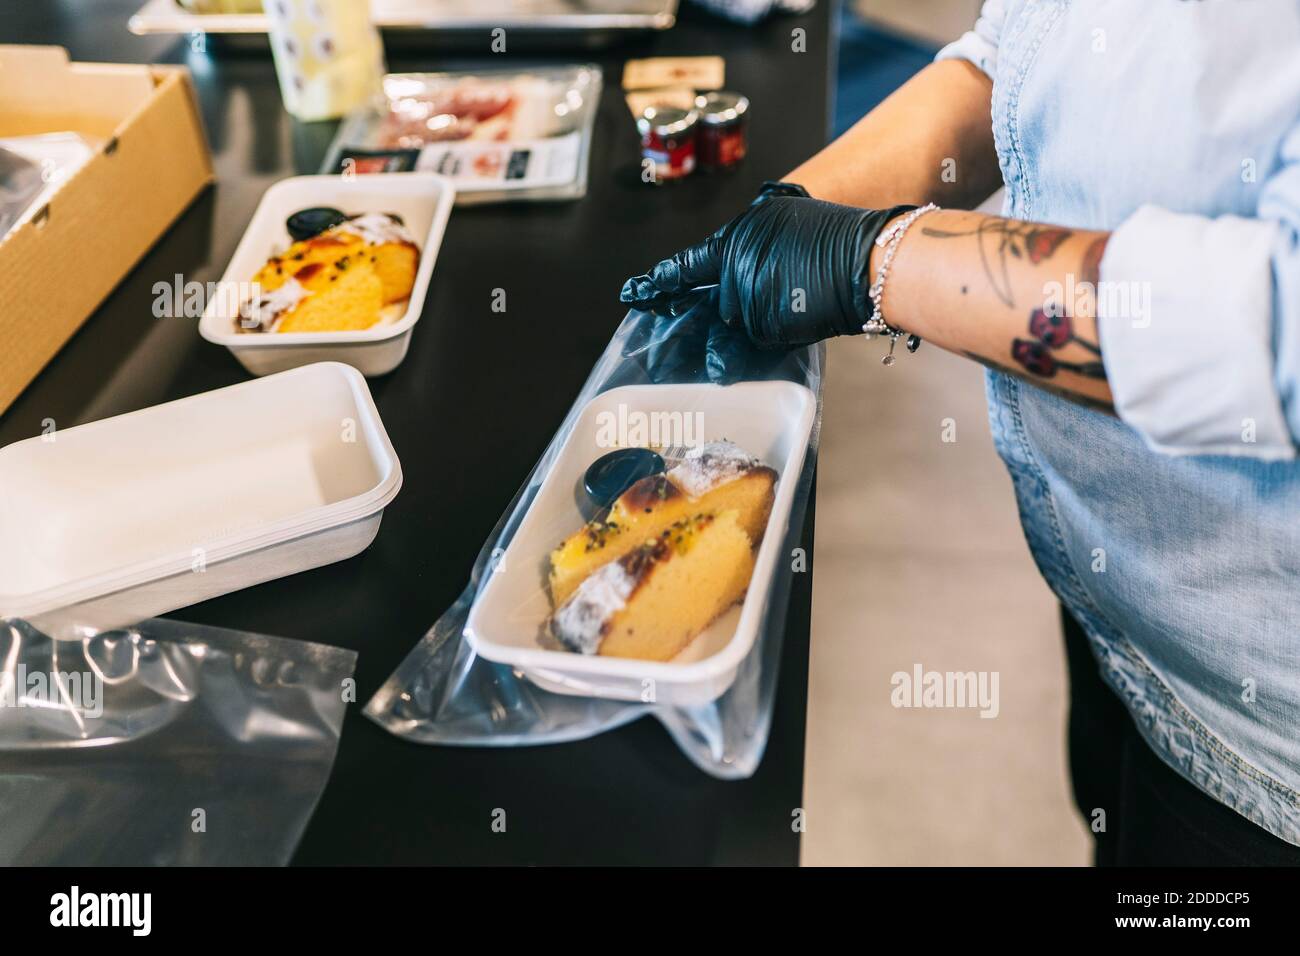 Midsection of female chef putting fresh take out meal in plastic bag at restaurant Stock Photo